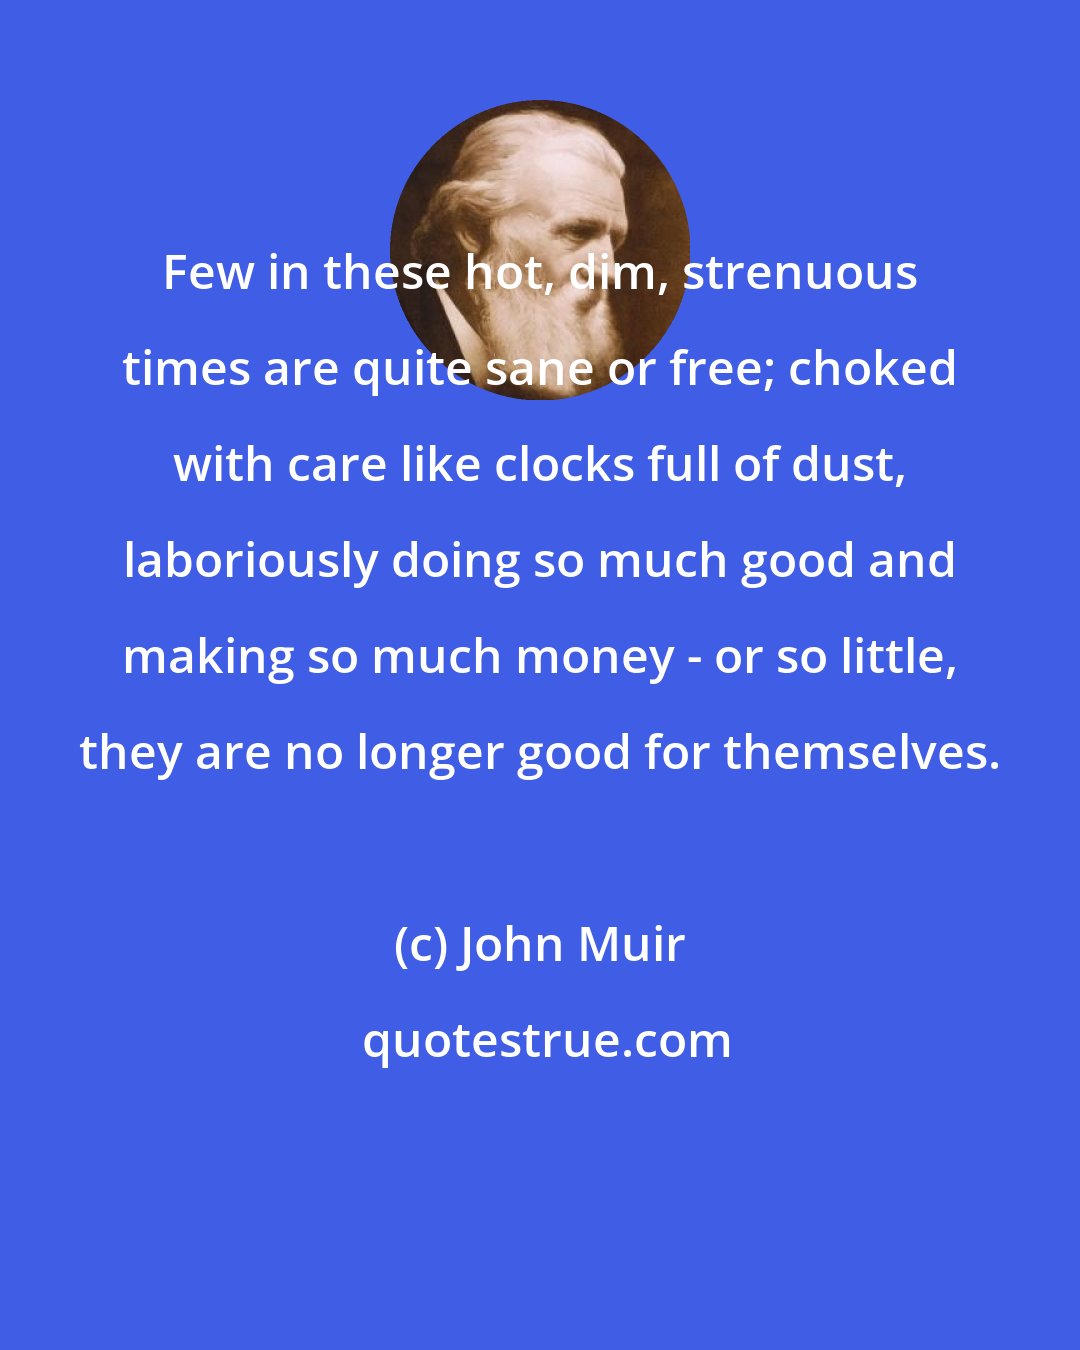 John Muir: Few in these hot, dim, strenuous times are quite sane or free; choked with care like clocks full of dust, laboriously doing so much good and making so much money - or so little, they are no longer good for themselves.